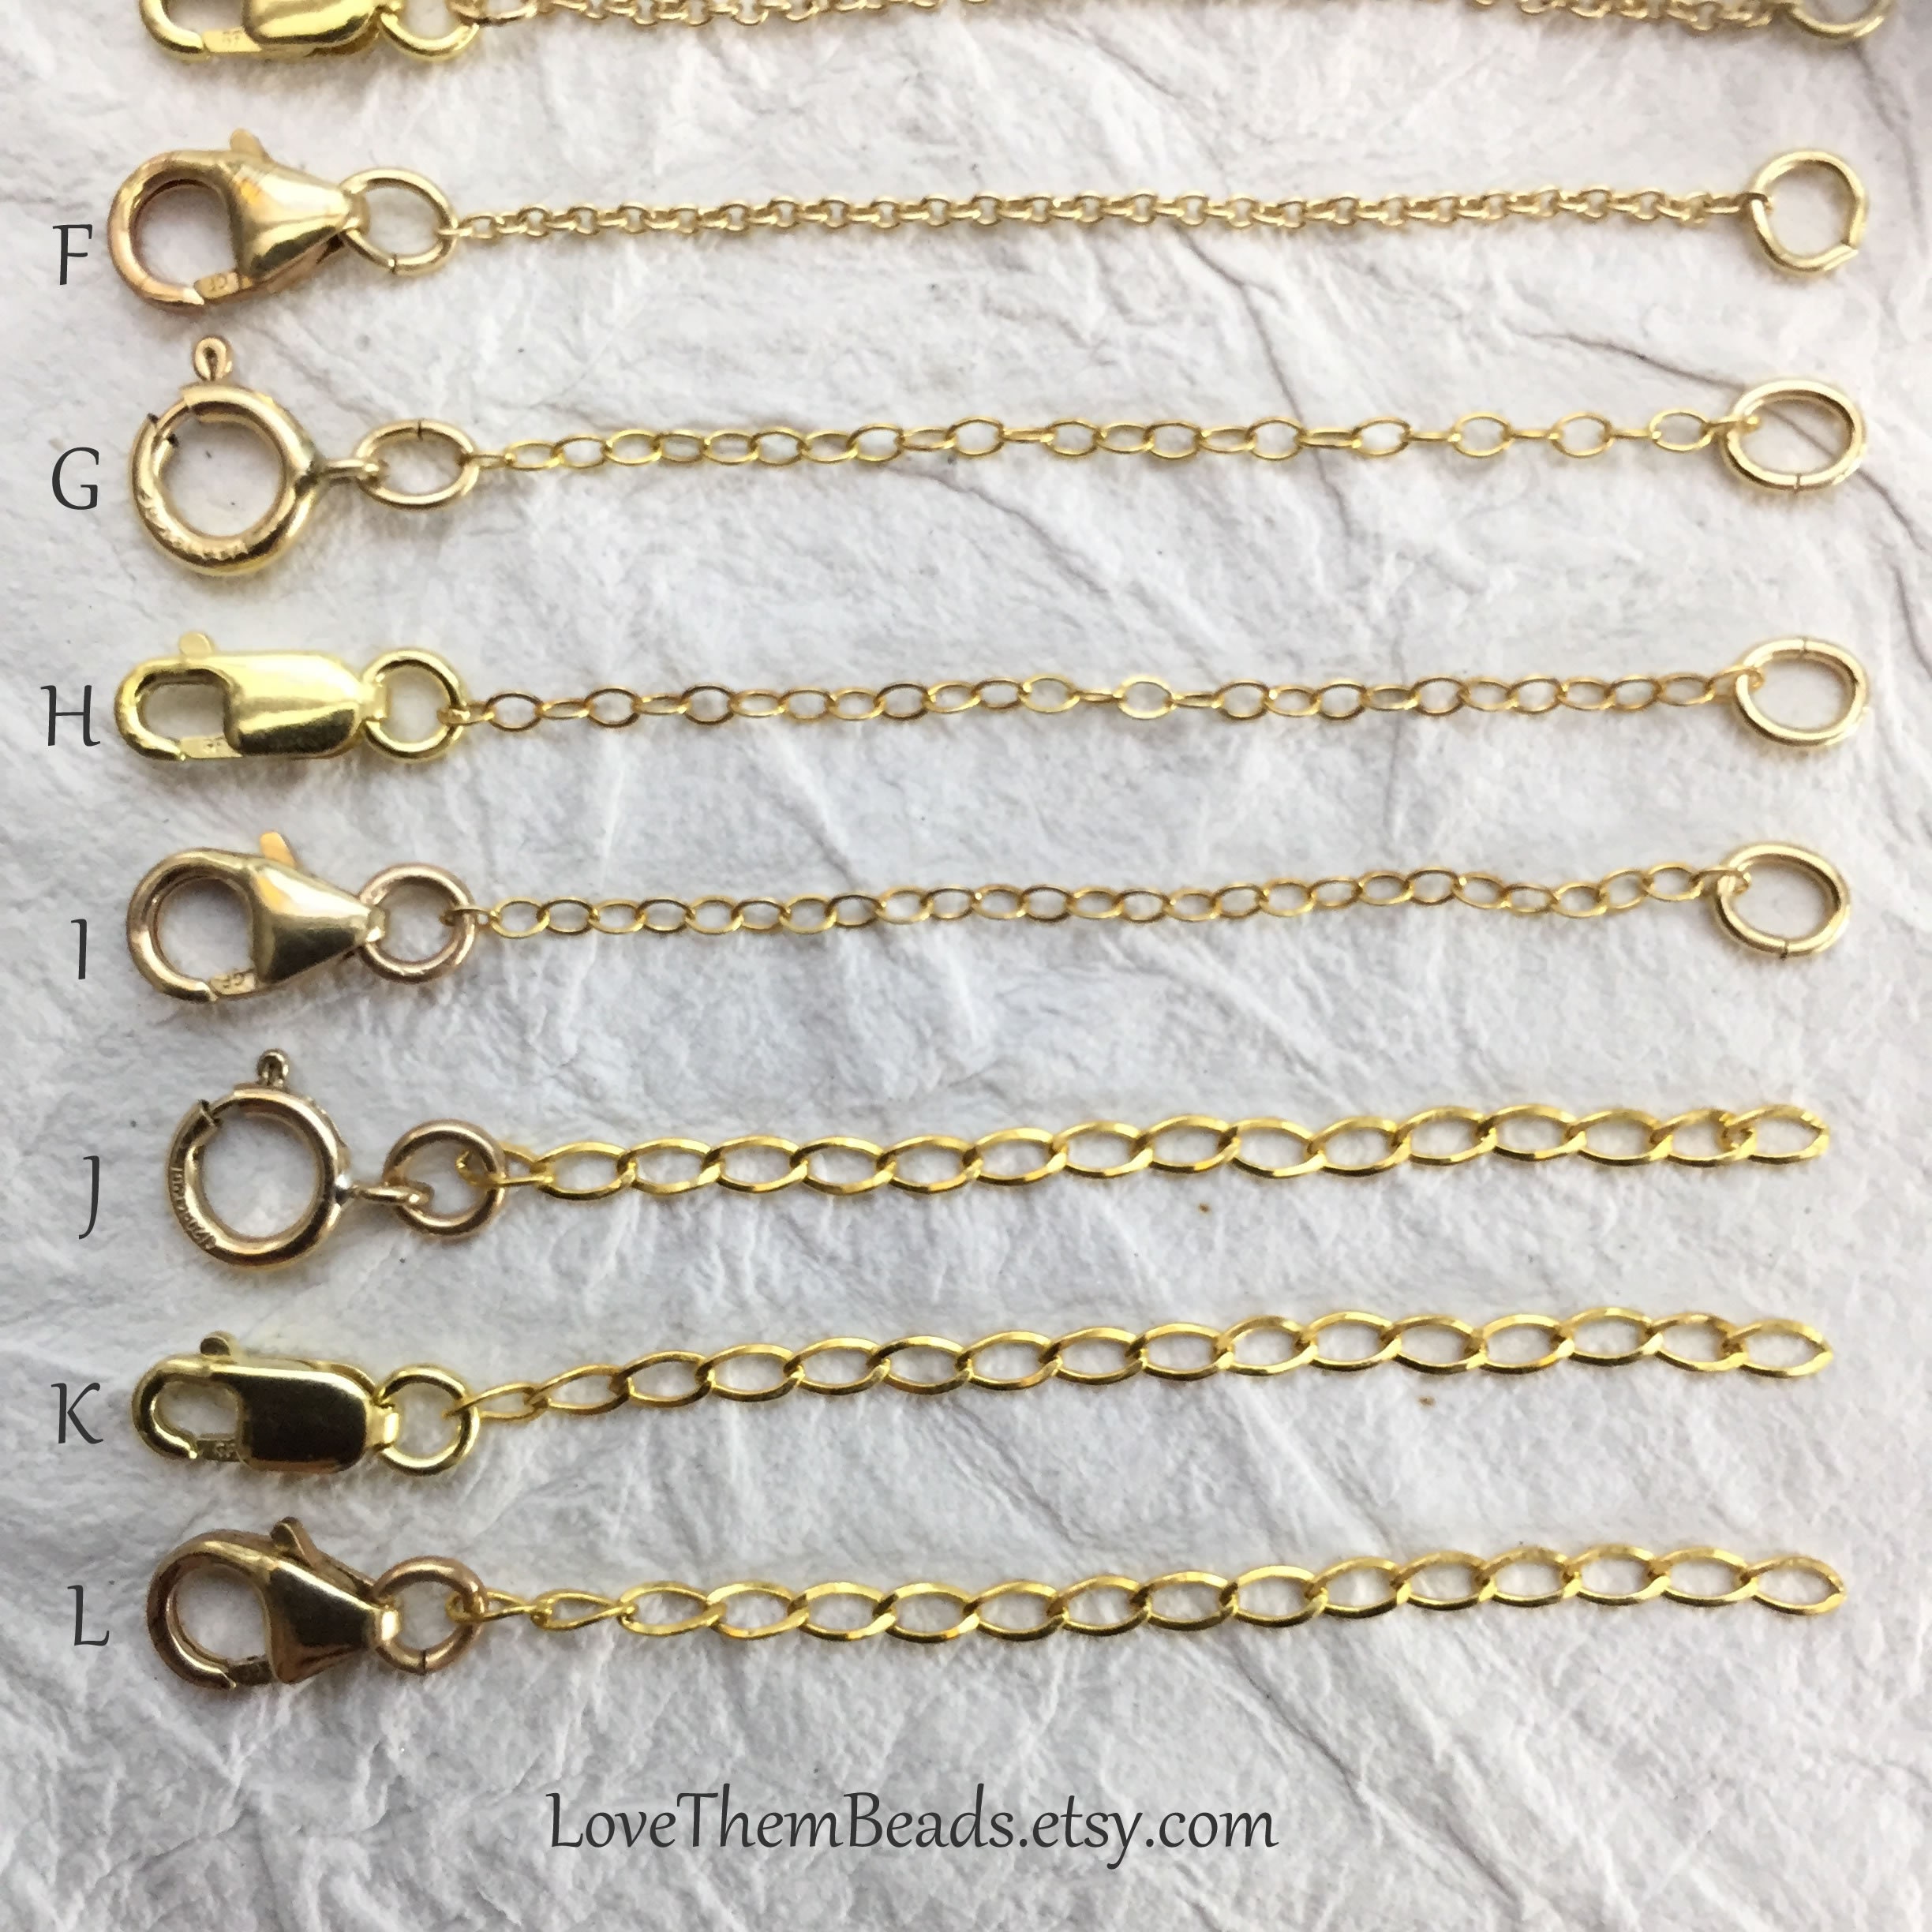 Heavy Weight Sterling Silver Chain Extenders to Add or Adjust Length for  Necklaces or Bracelets Custom Made to Order by Lovethembeads 